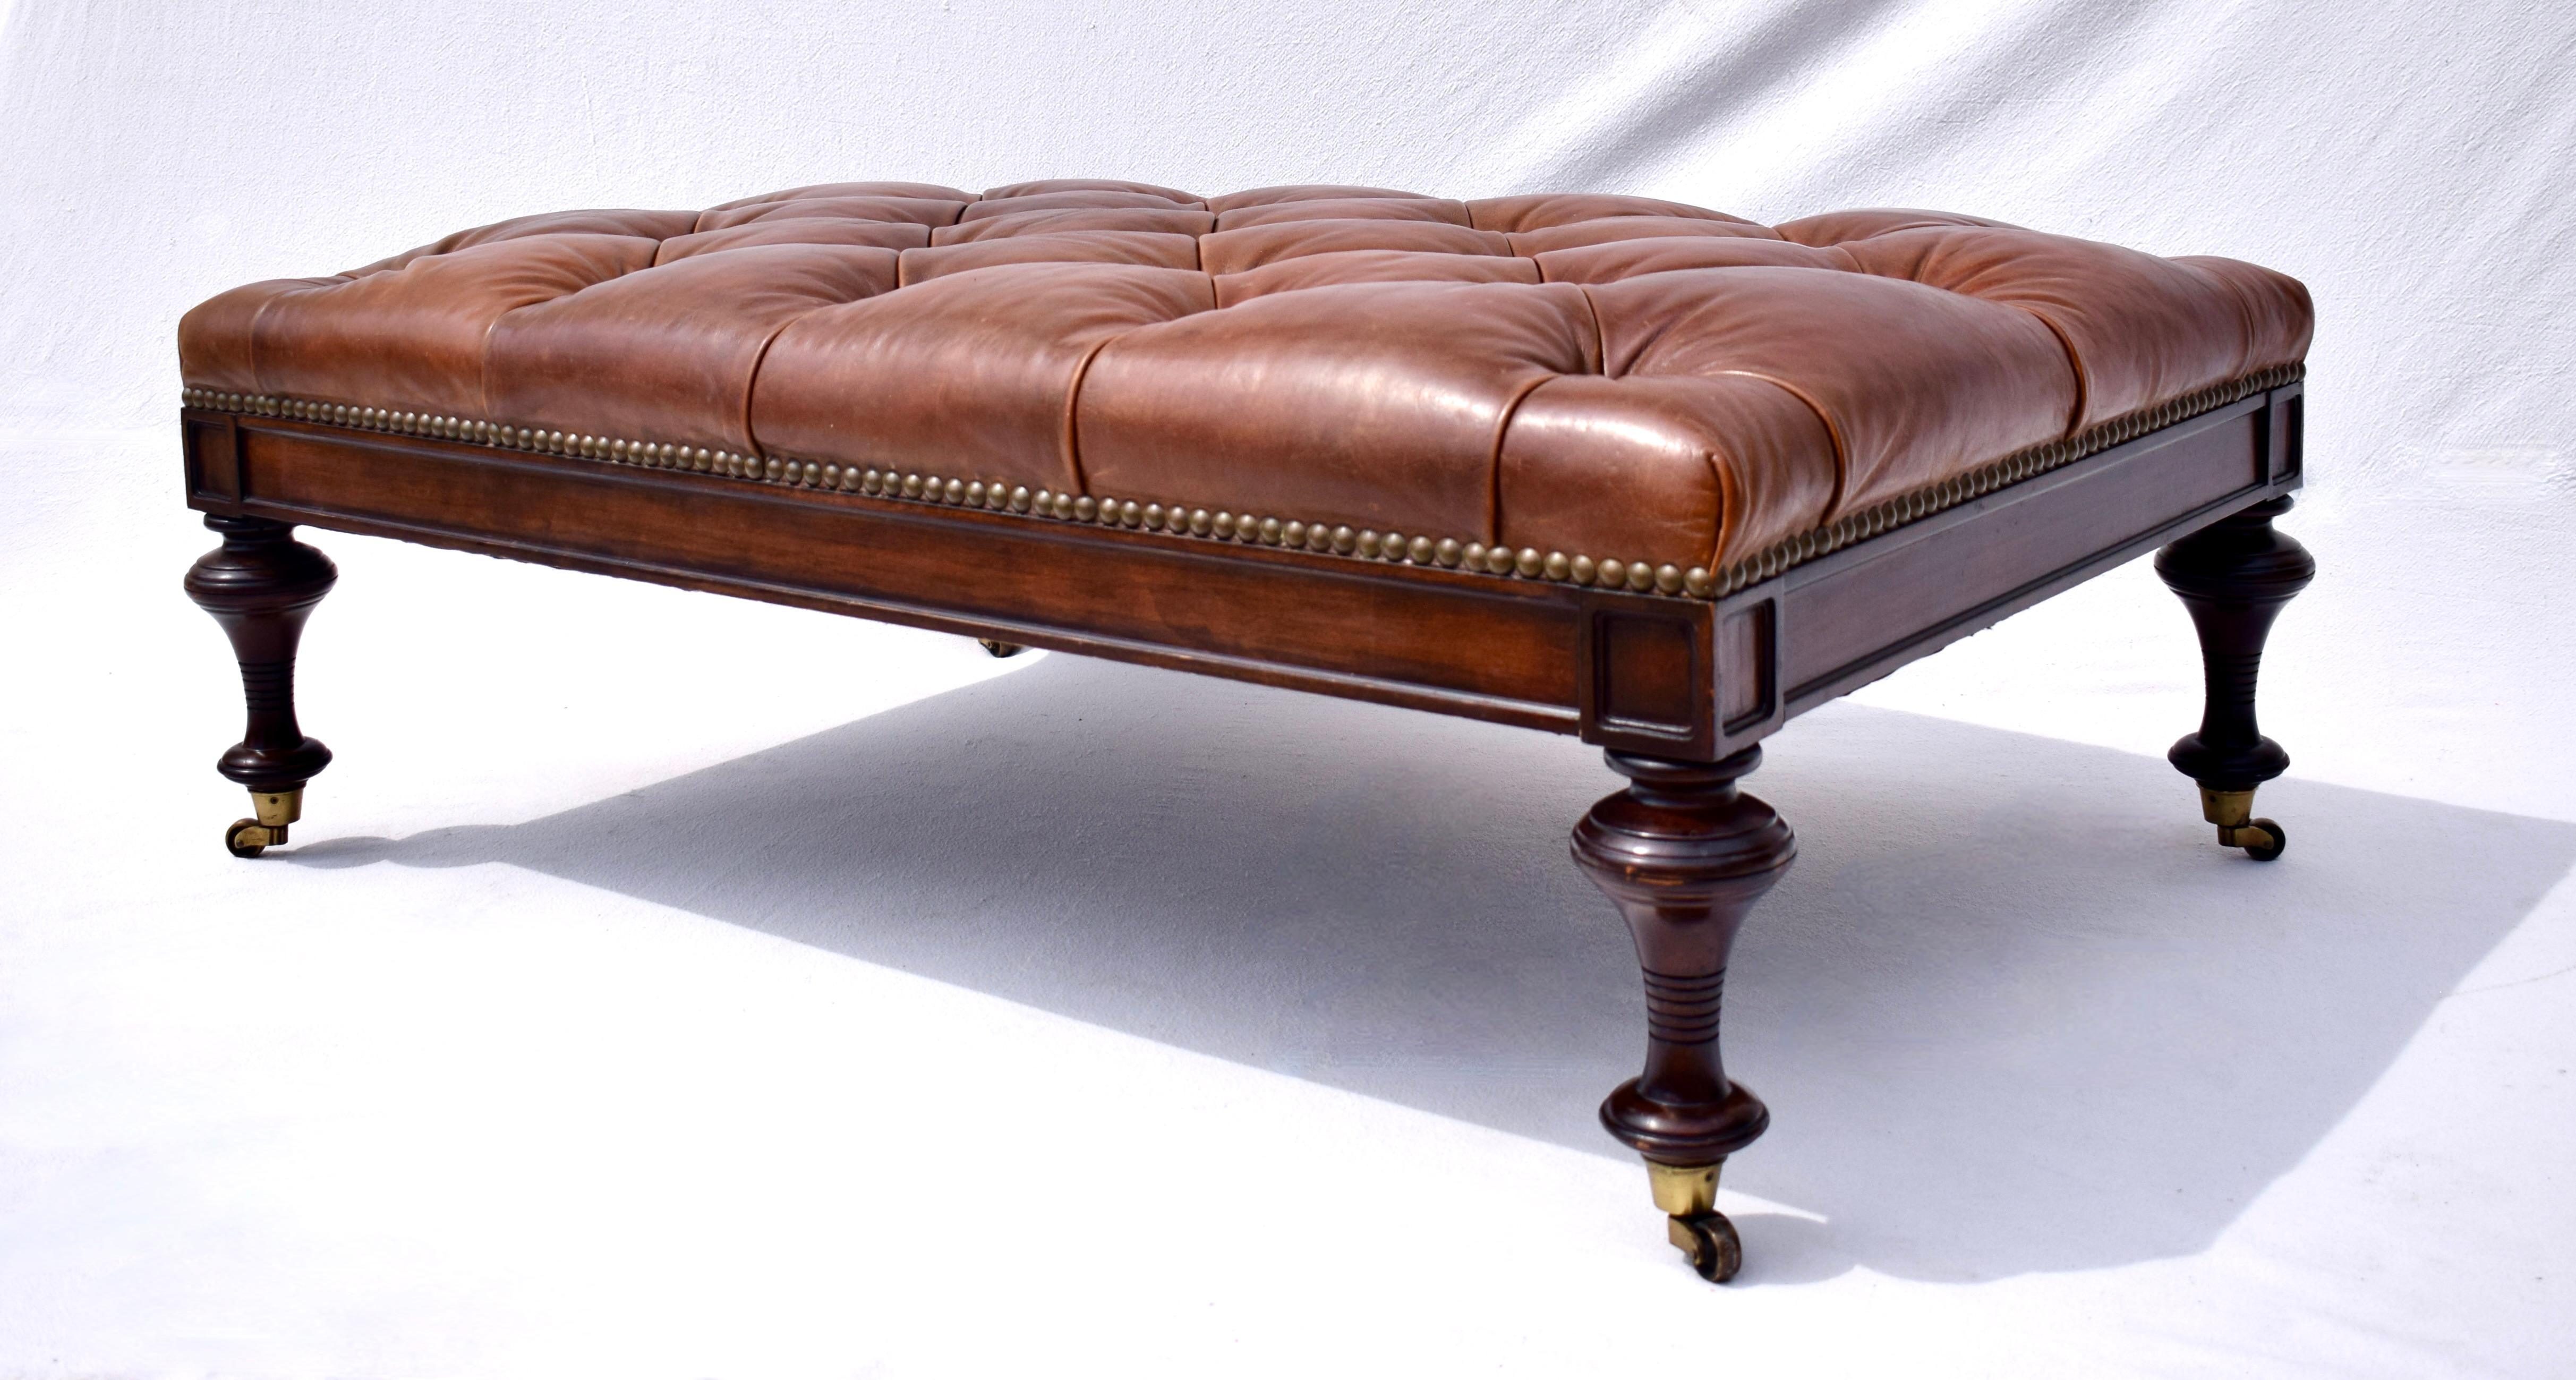 20th Century Chesterfield Leather Ottoman on Brass Casters by Drexel 